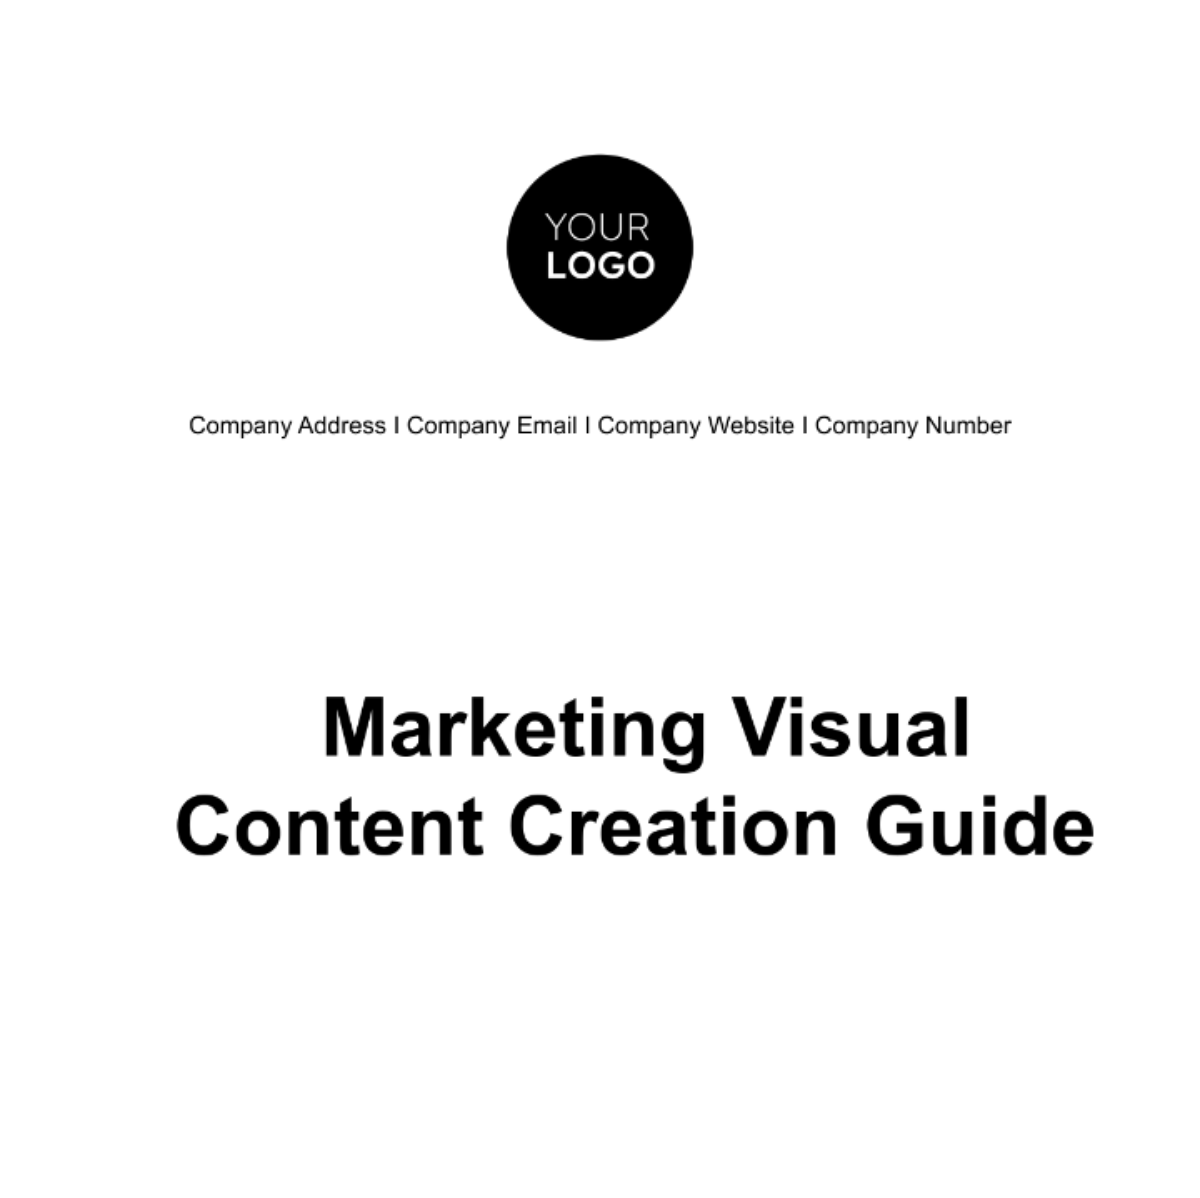 Marketing Visual Content Creation Guide Template